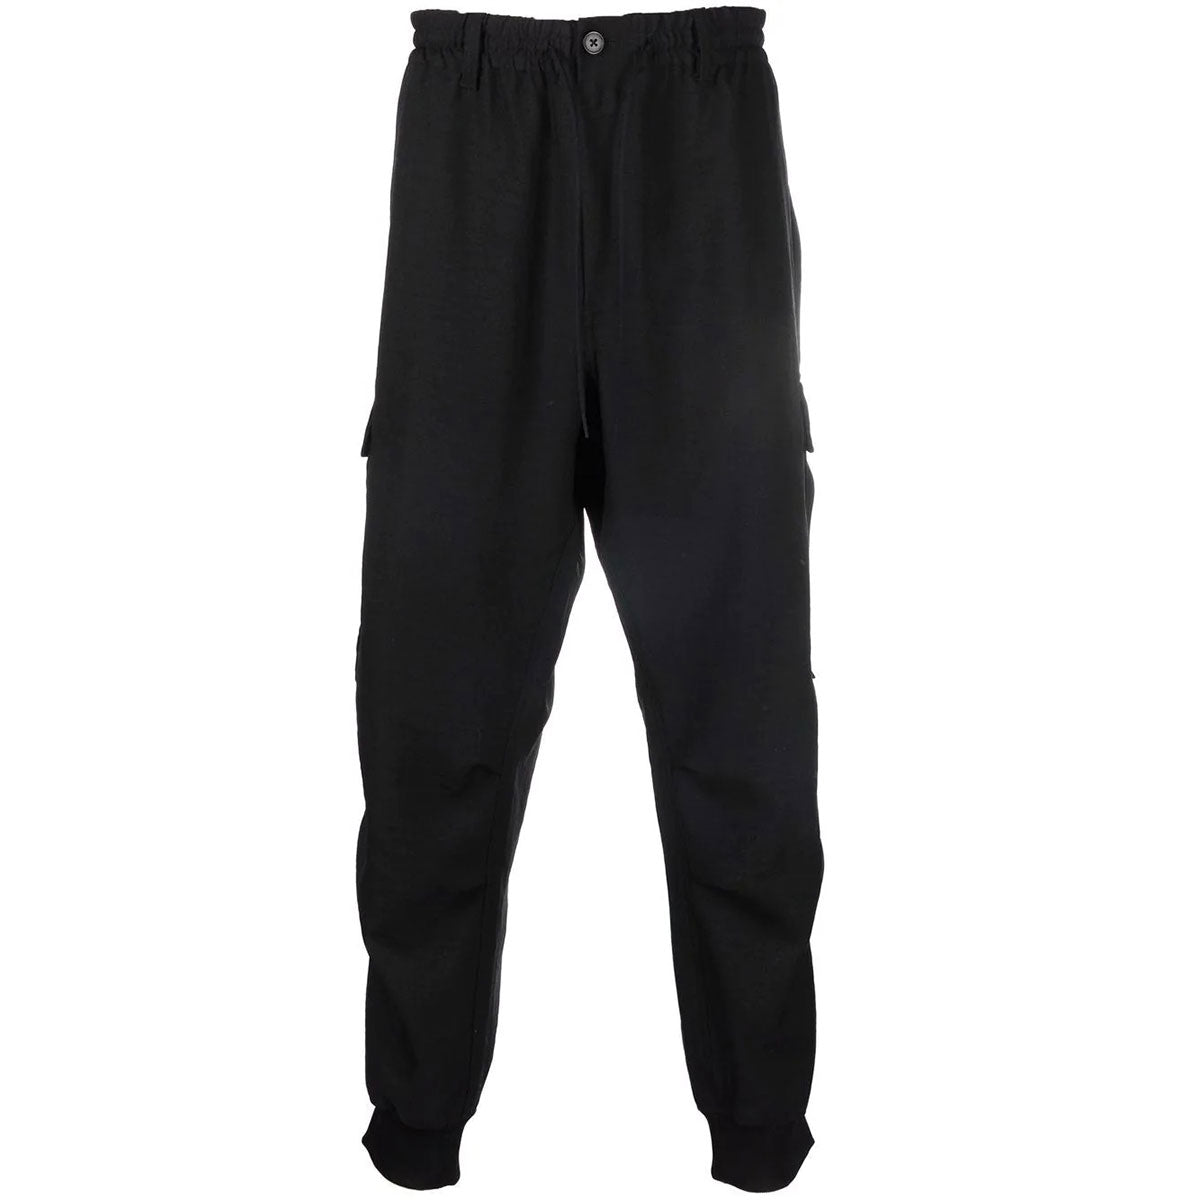 M CLASSIC SPORT UNIFORM CUFFED CARGO PANTS - Why are you here?